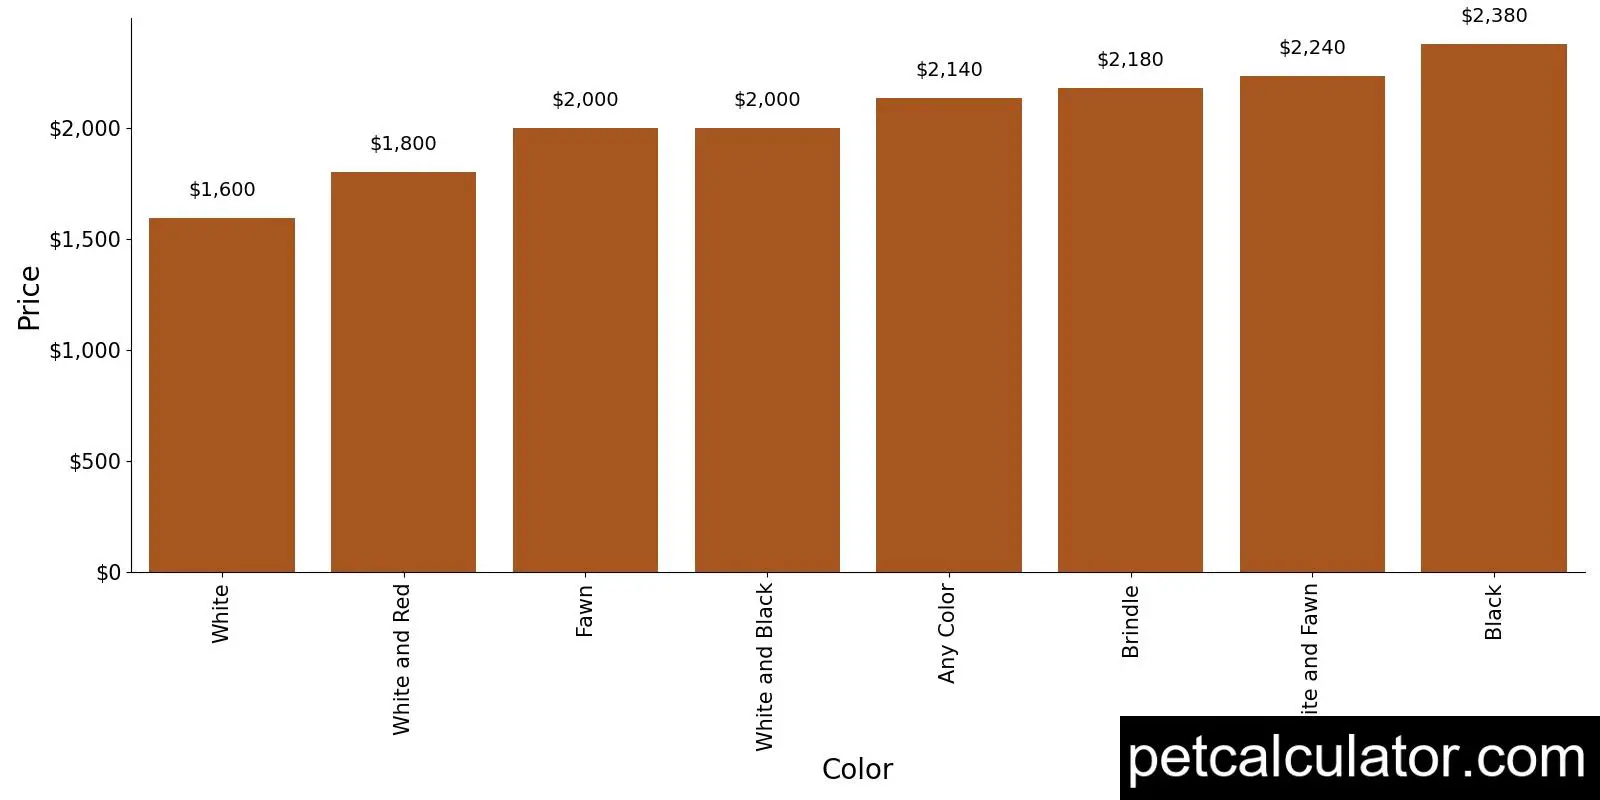 Price of Whippet by Color 